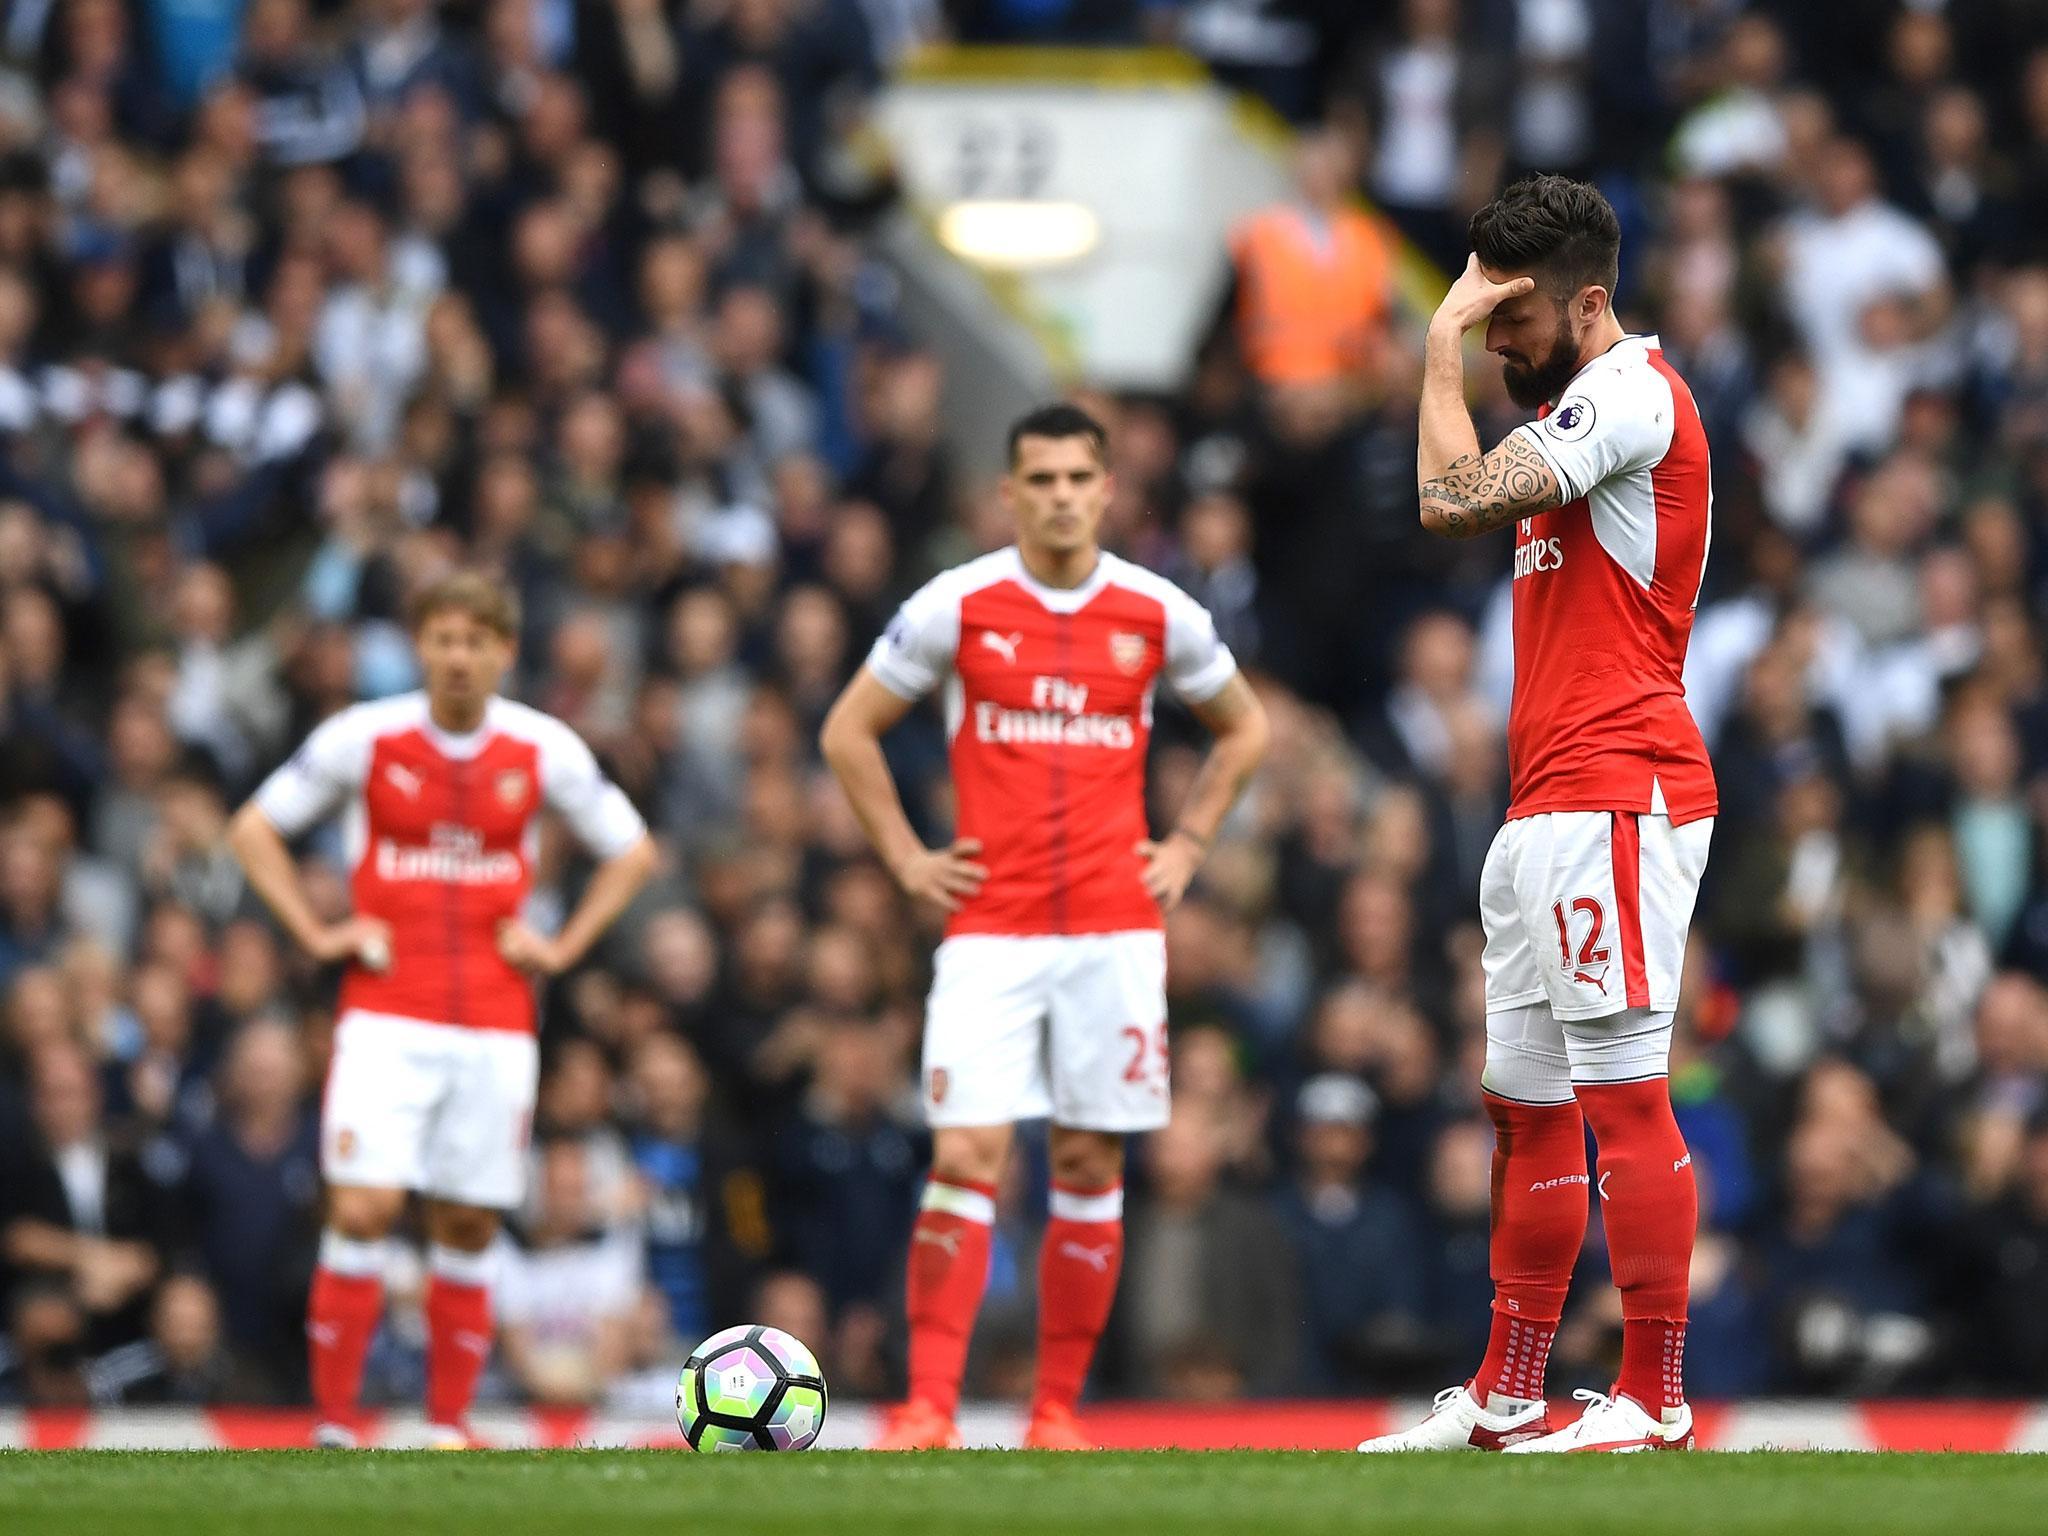 Arsenal were comprehensively outplayed by Tottenham at White Hart Lane